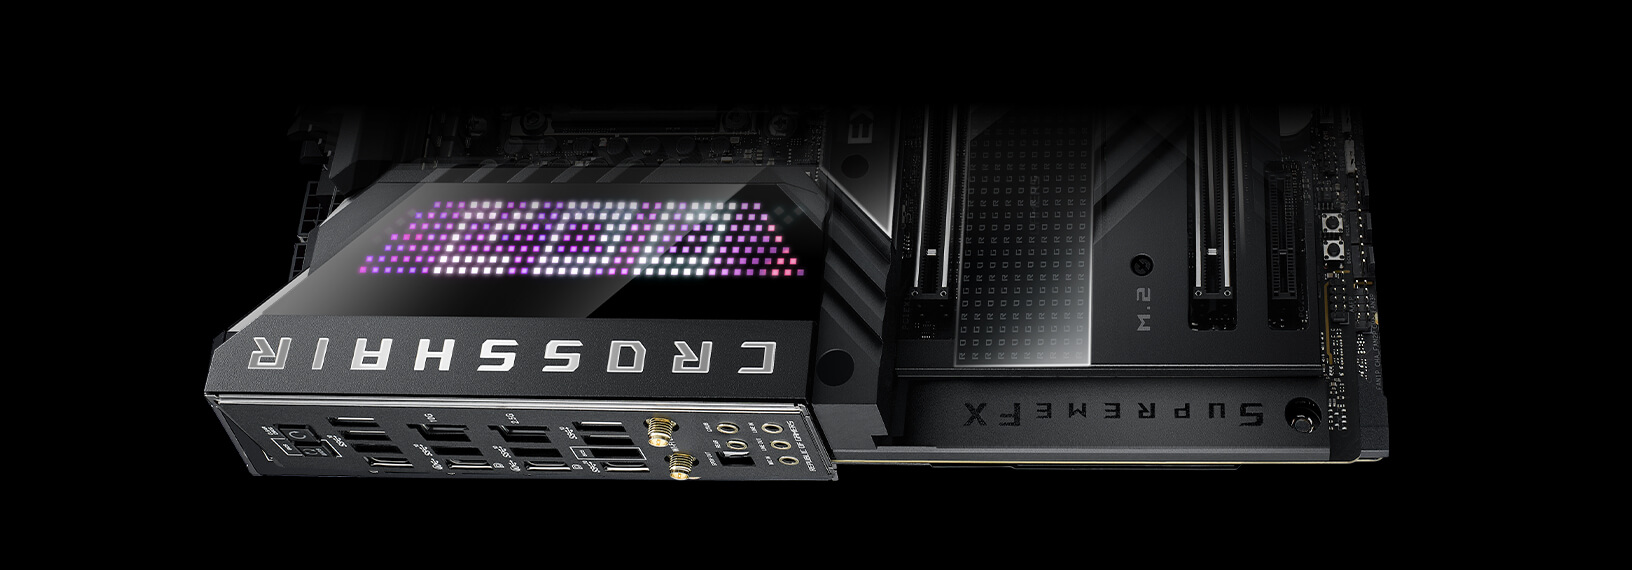 The ROG CROSSHAIR X670E EXTREME motherboard features SupremeFX audio.